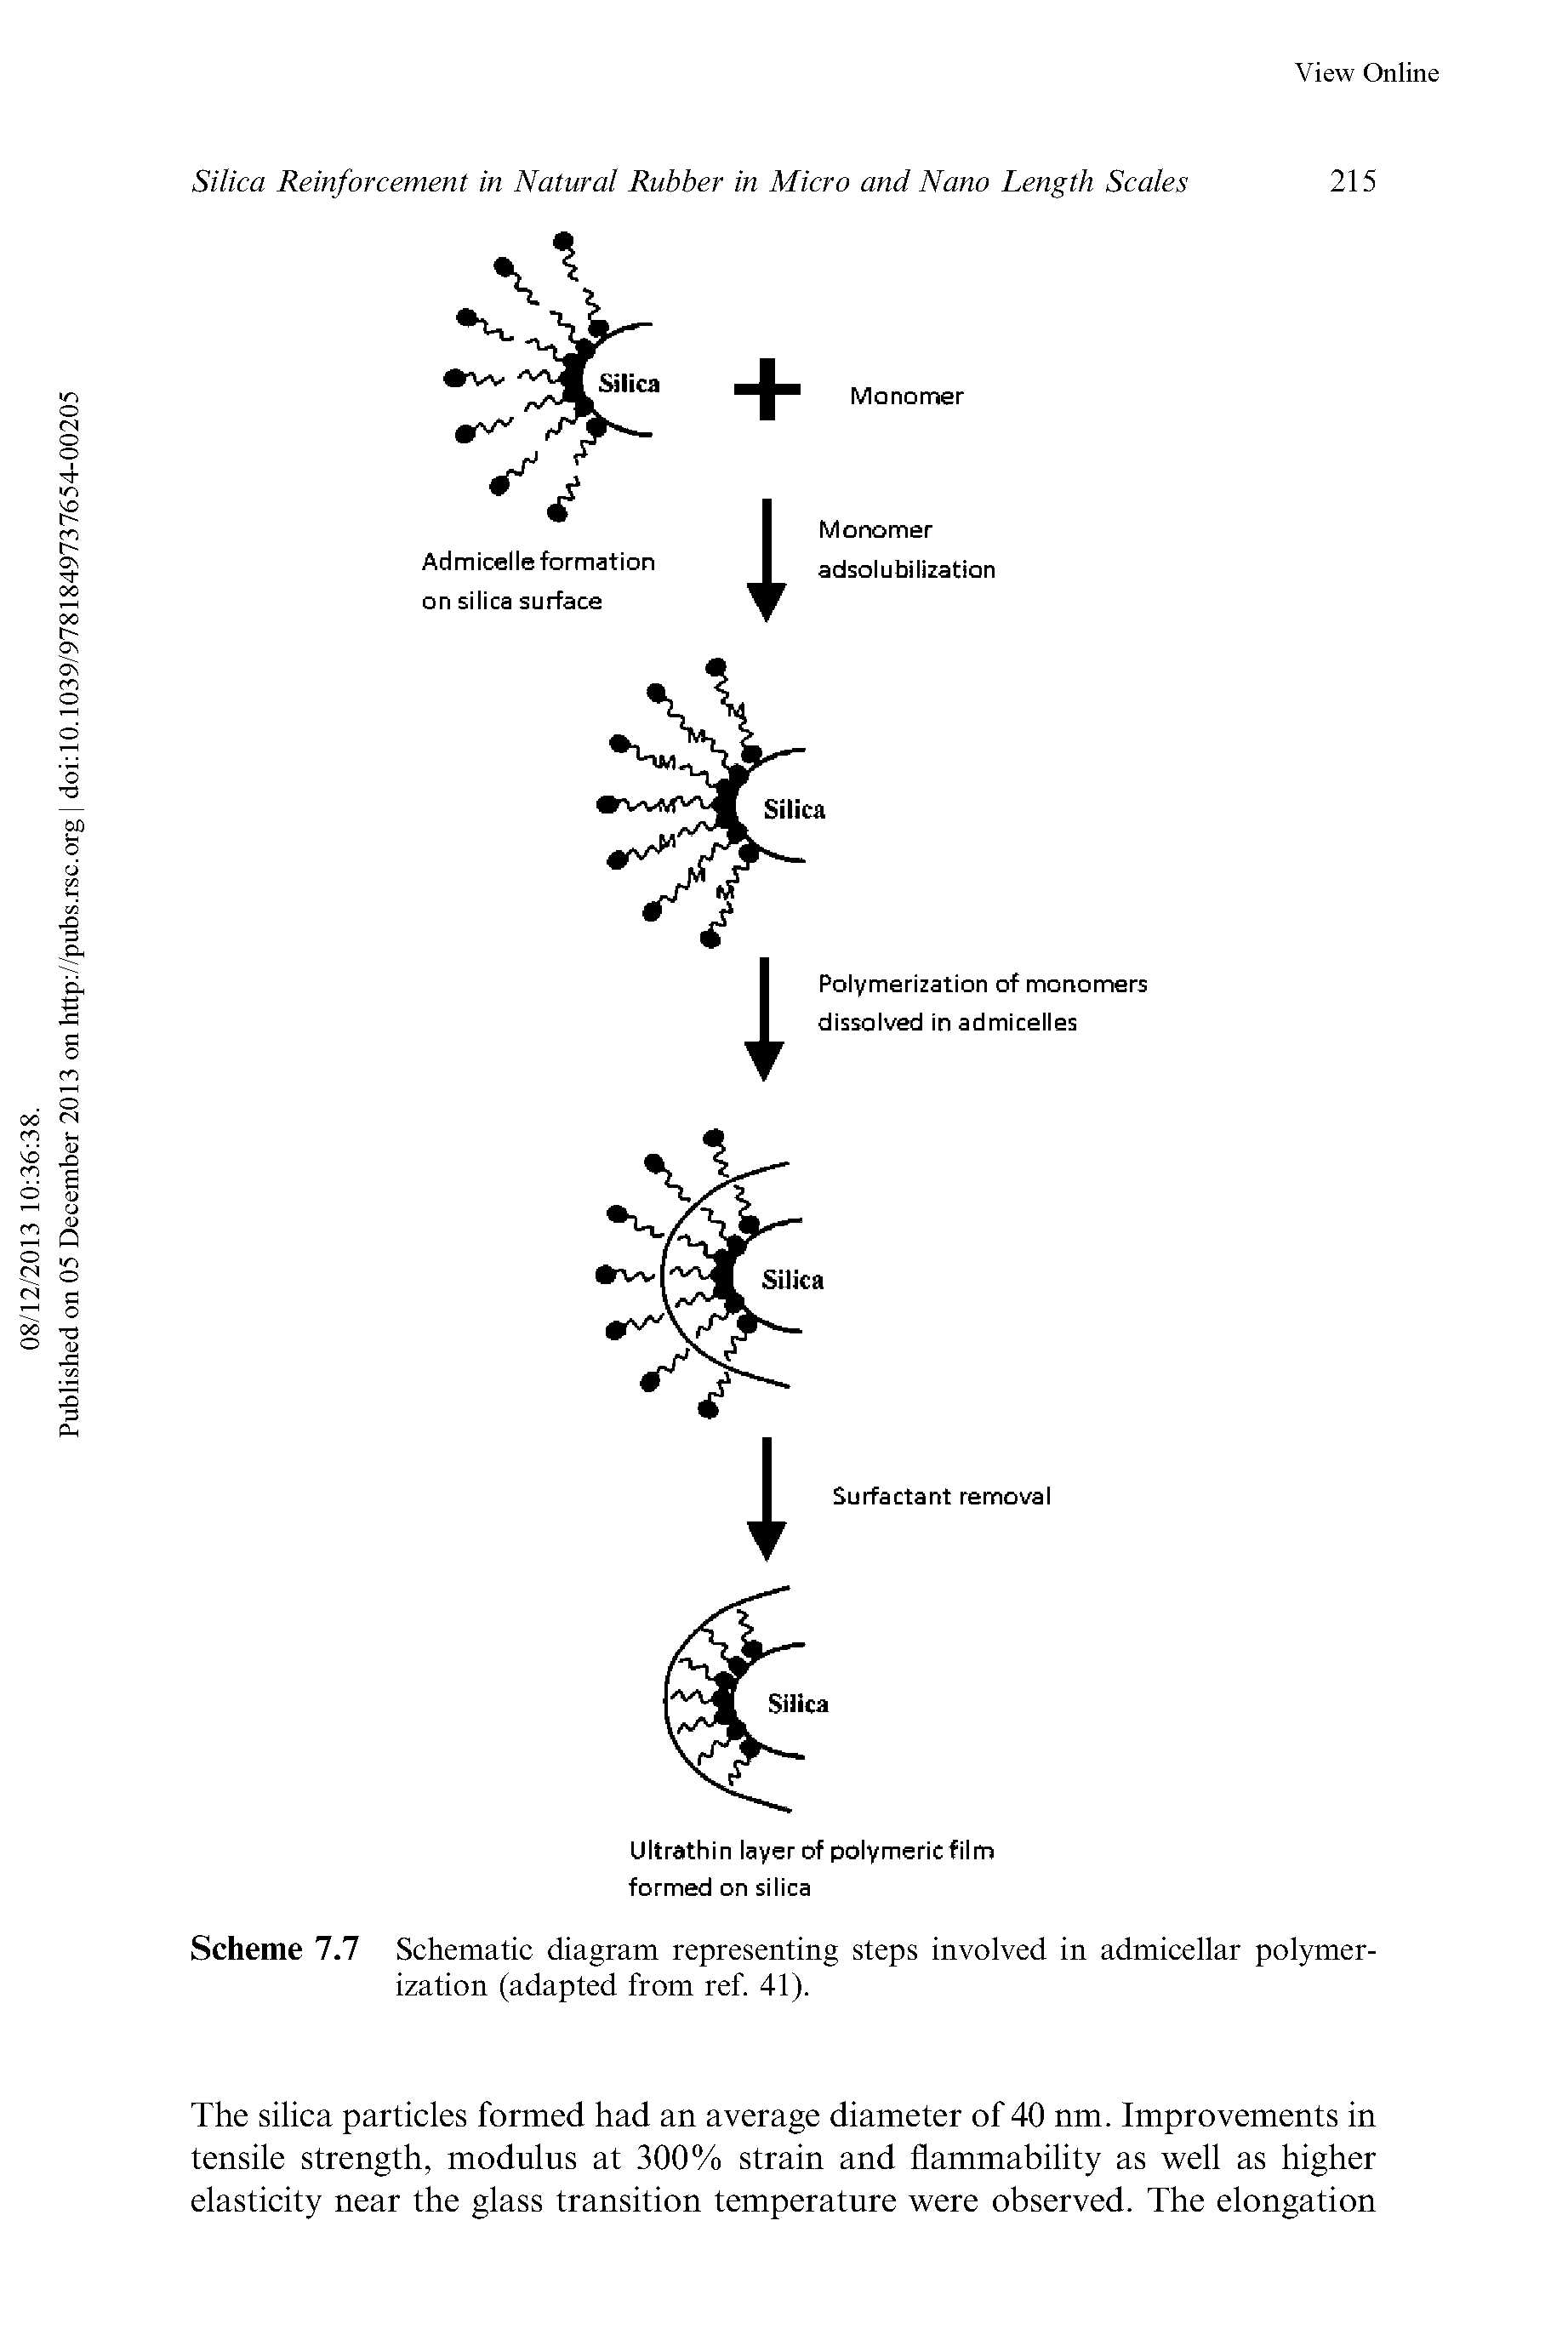 Scheme 7.7 Schematic diagram representing steps involved in admicellar polymerization (adapted from ref. 41).